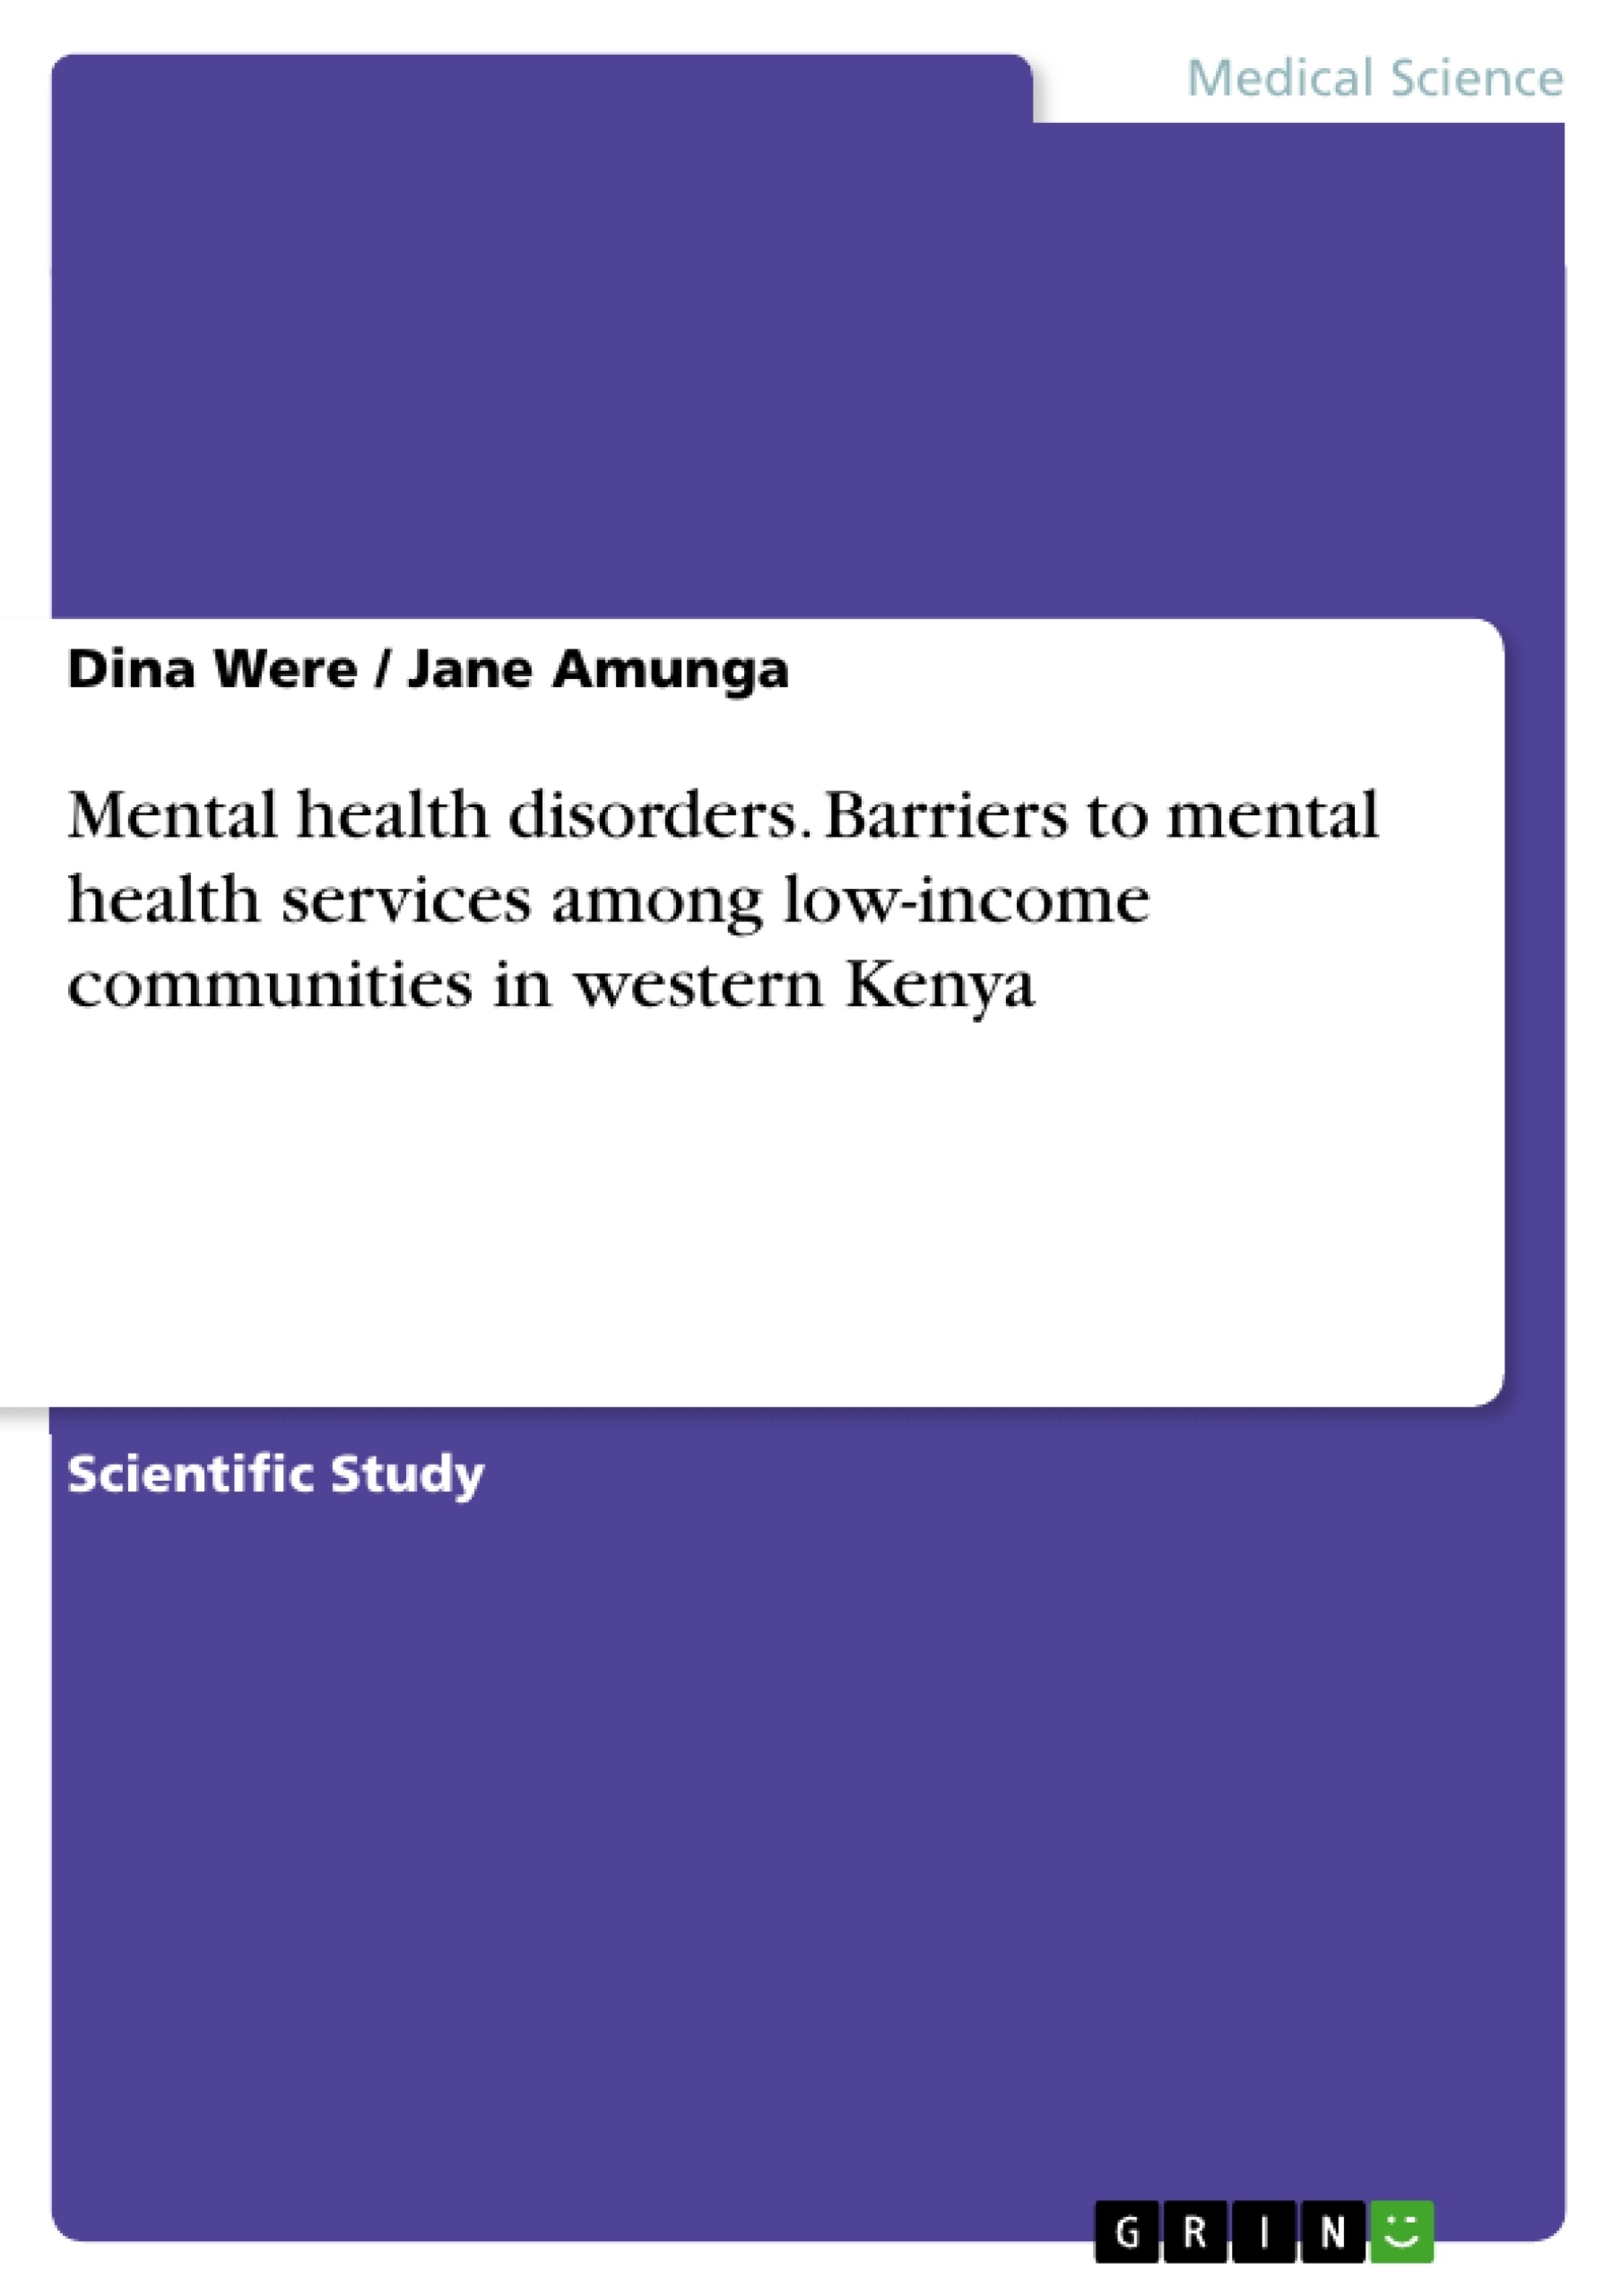 Título: Mental health disorders. Barriers to mental health services among low-income communities in western Kenya